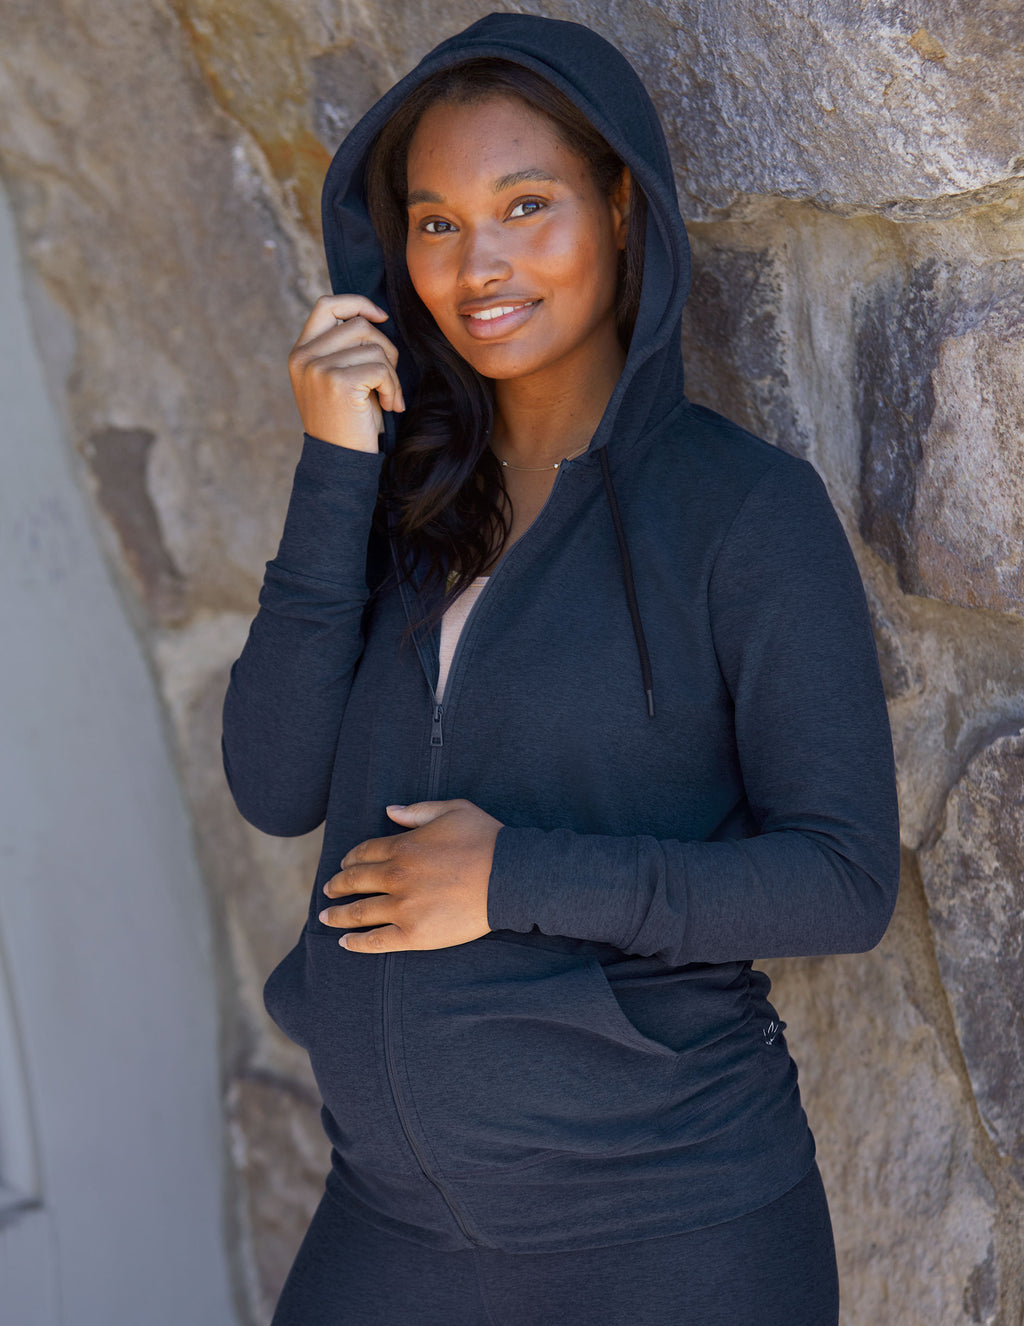 Spacedye Everyday Maternity Hoodie Featured Image